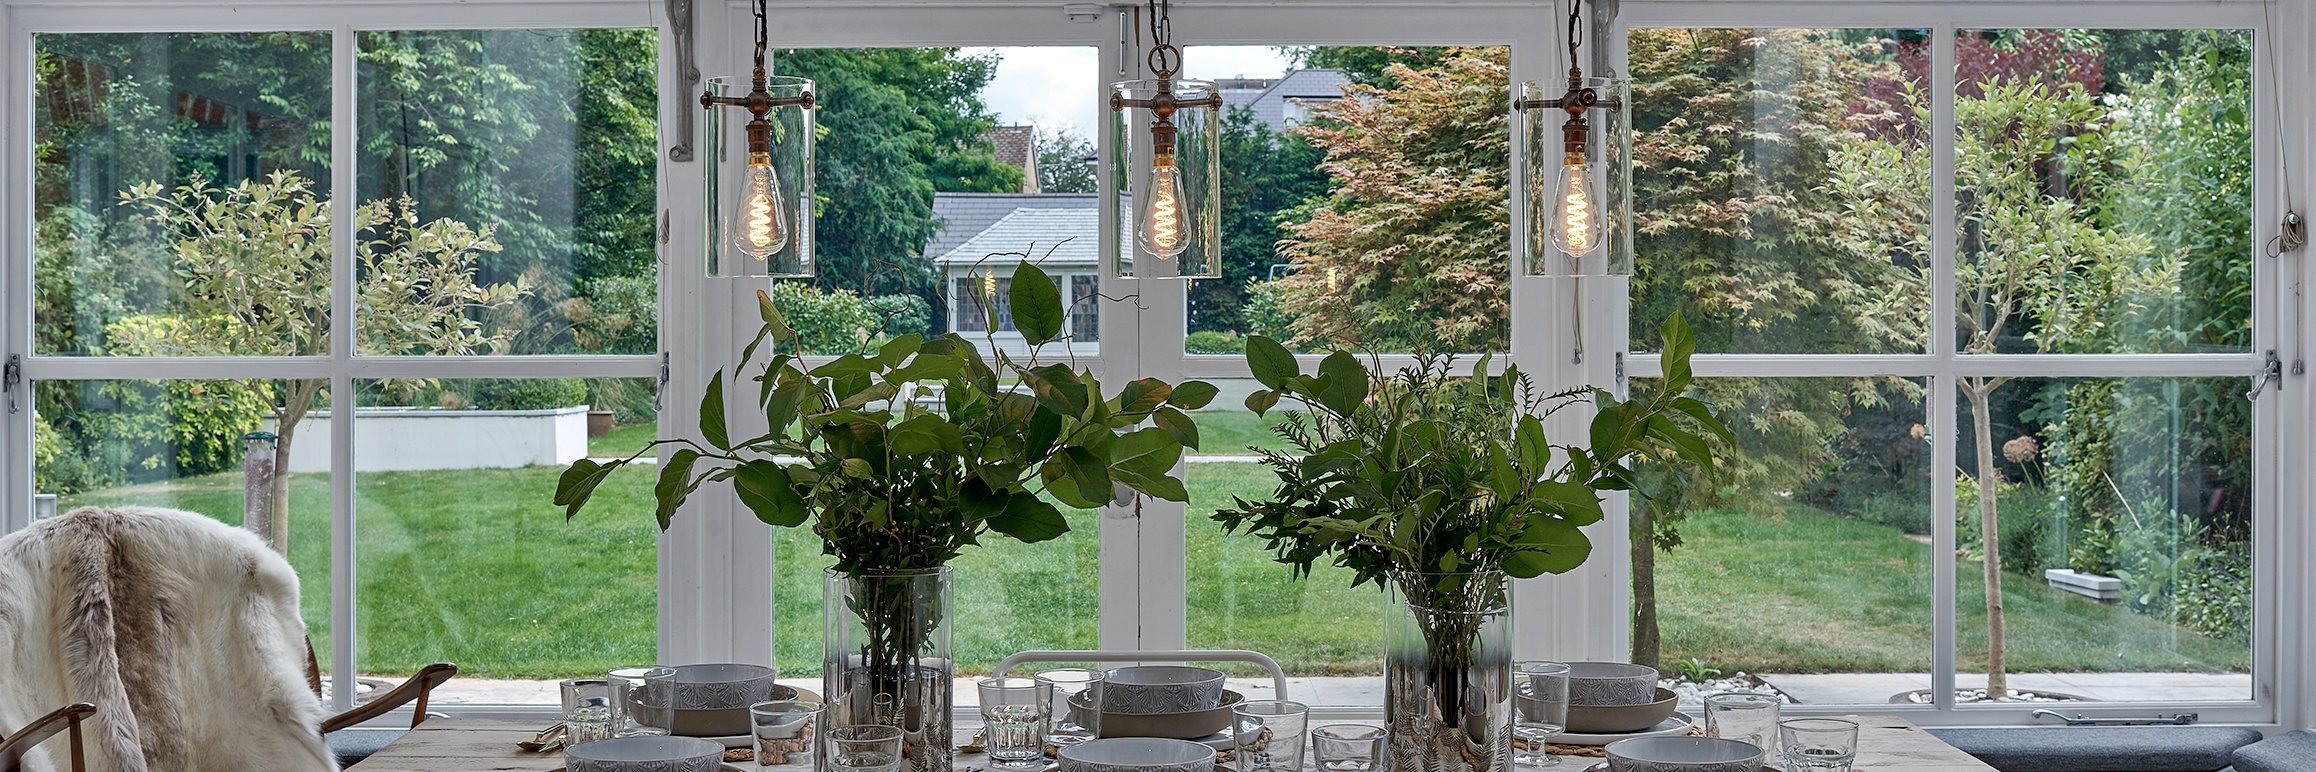 A green dining area with three clear glass pendant lights from the Sellack lighting collection, hanging above the table which is decorated with plants.